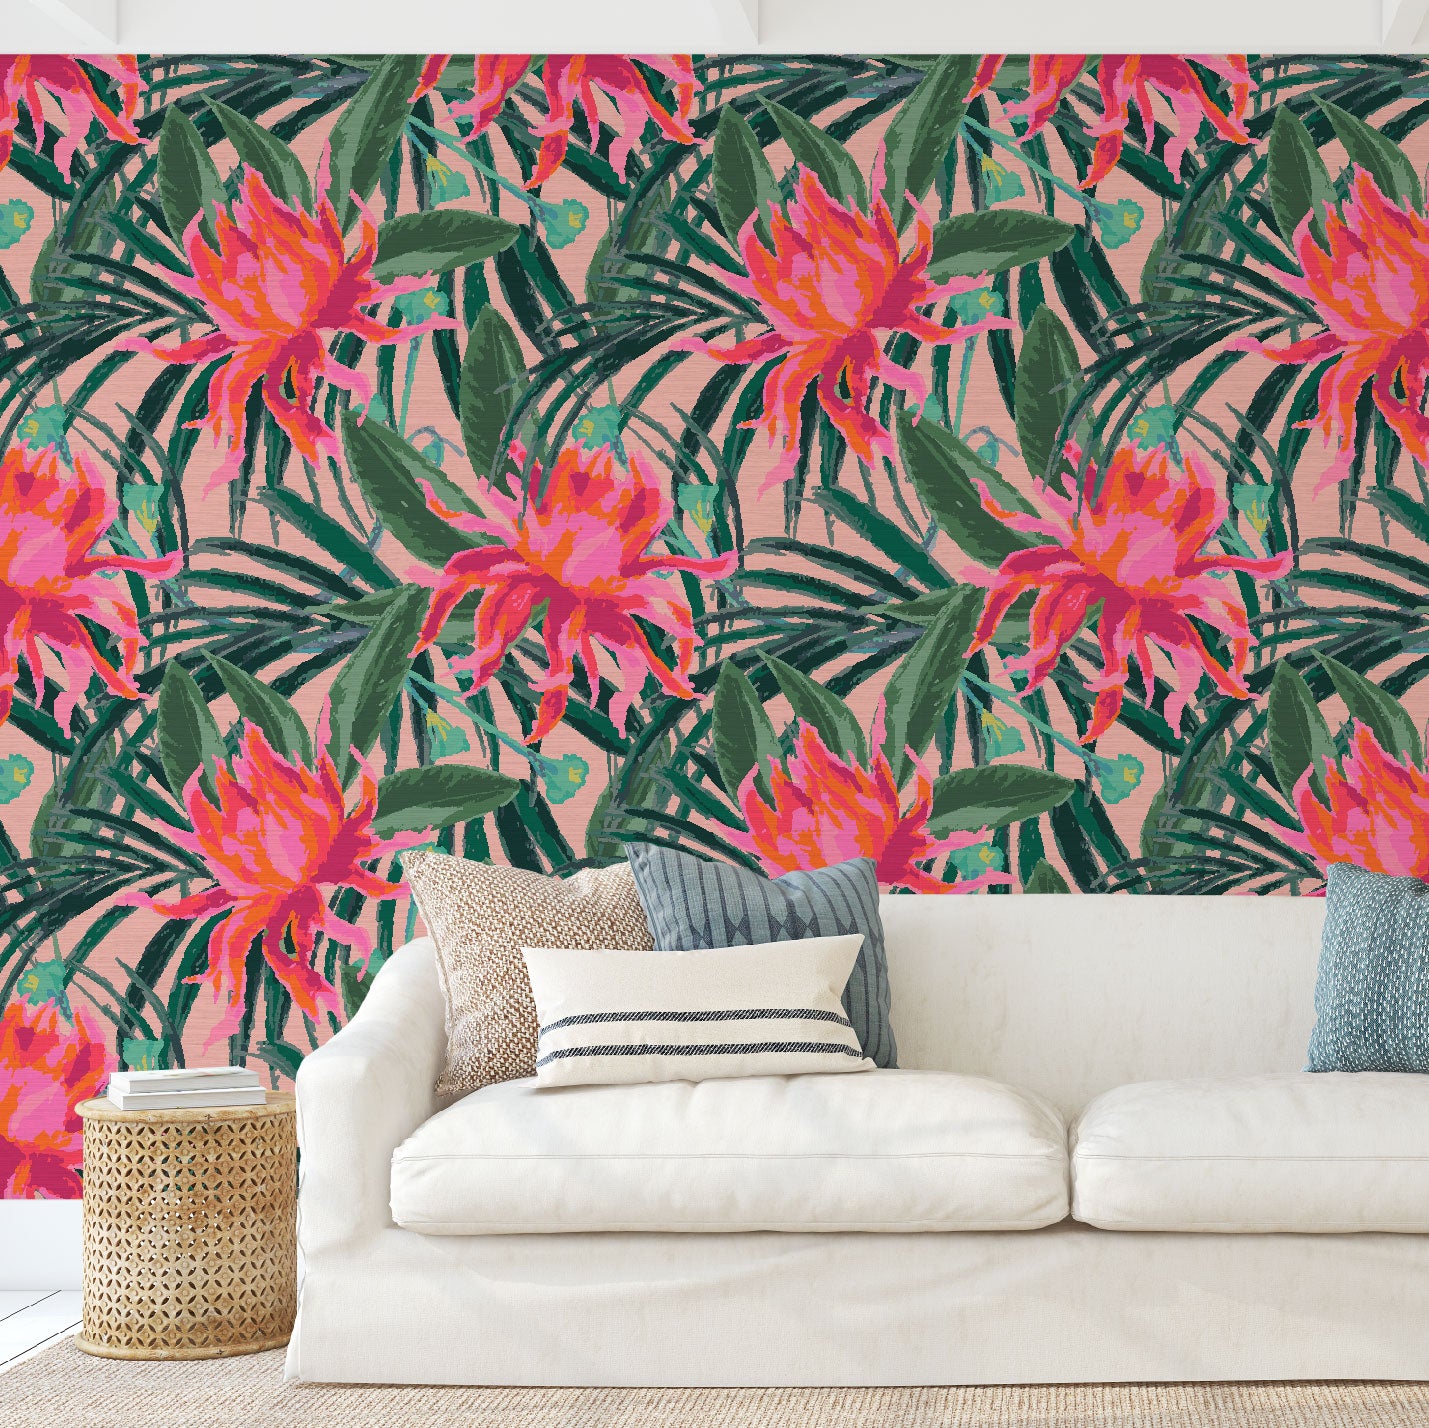 Living room with white couch and grasscloth wallpaper with light pink based featuring oversized painterly tropical flowers and palm leafs in striking shades of pink and leafs in shades of deep green